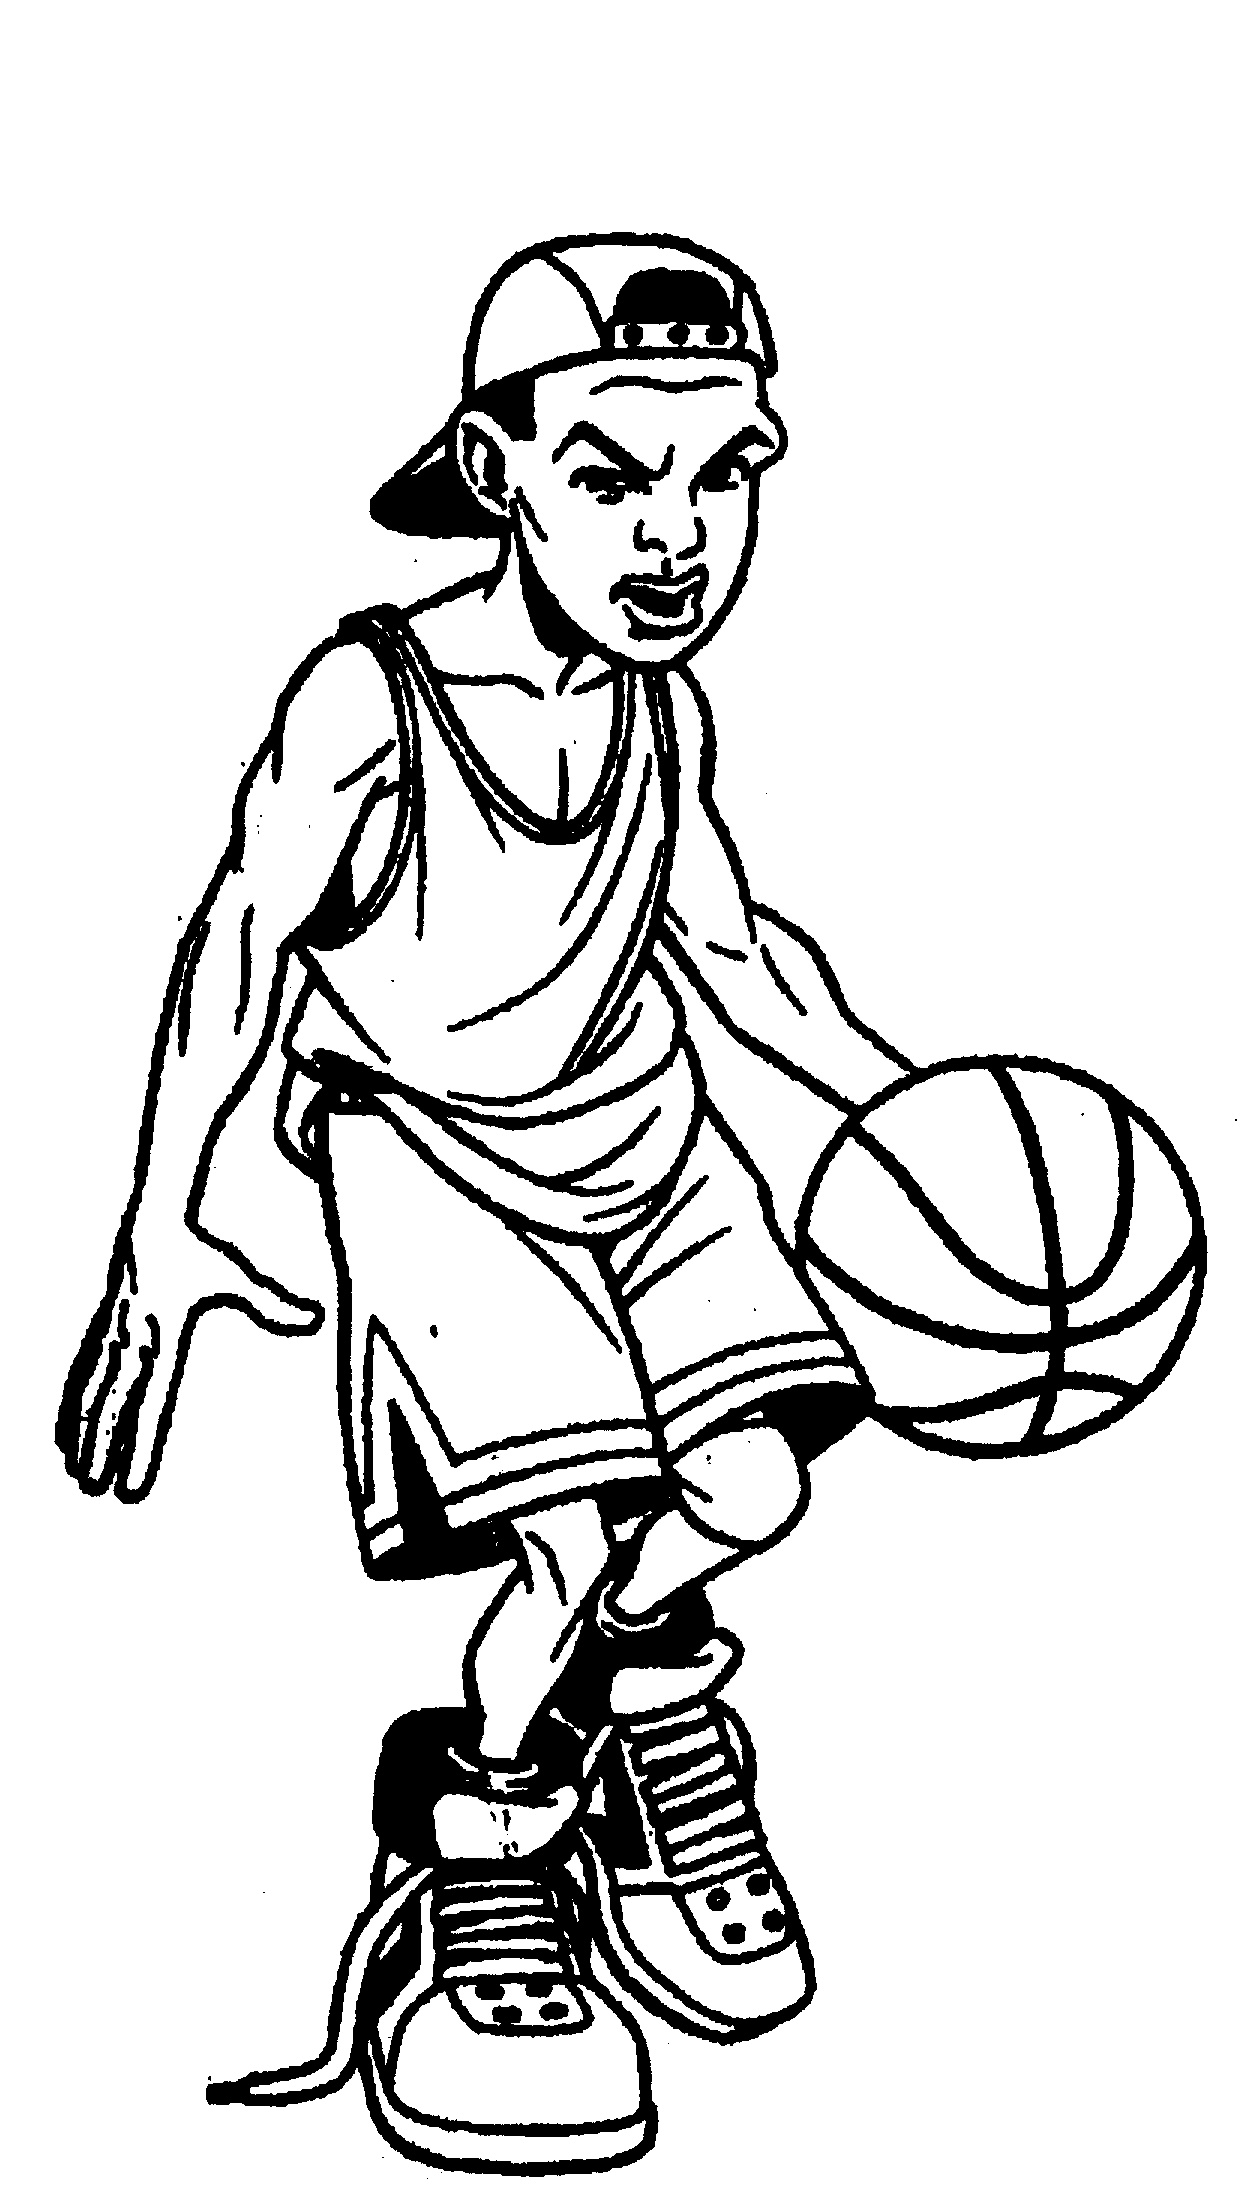 Images For Cool Basketball Logos To Draw